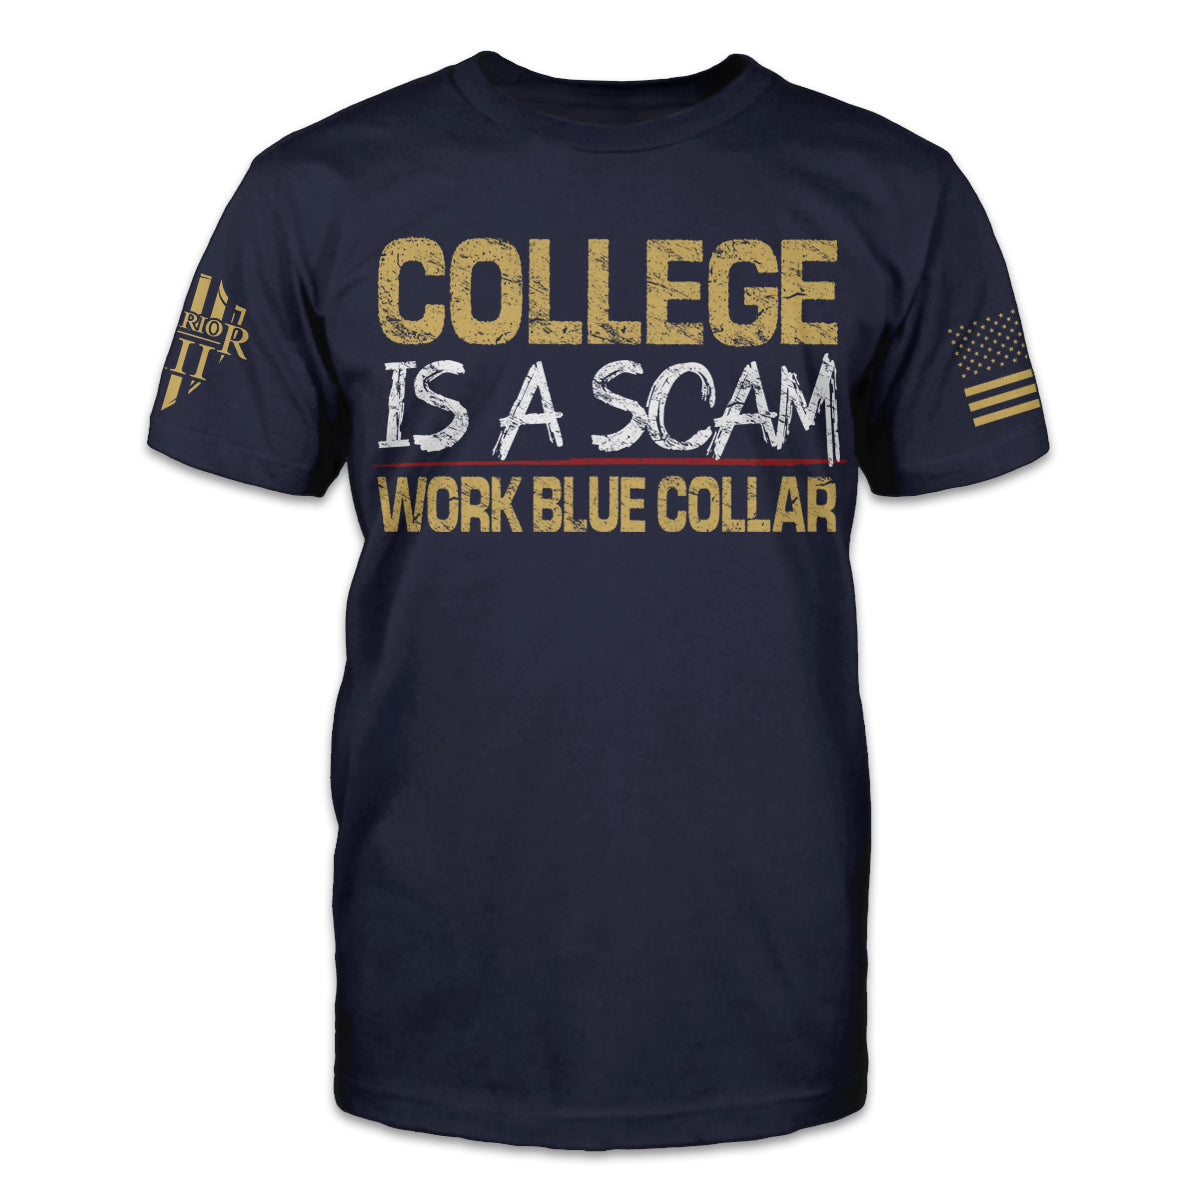 A navy blue t-shirt with the words "College Is A Scam - Work Blue Collar" printed on the front of the shirt.